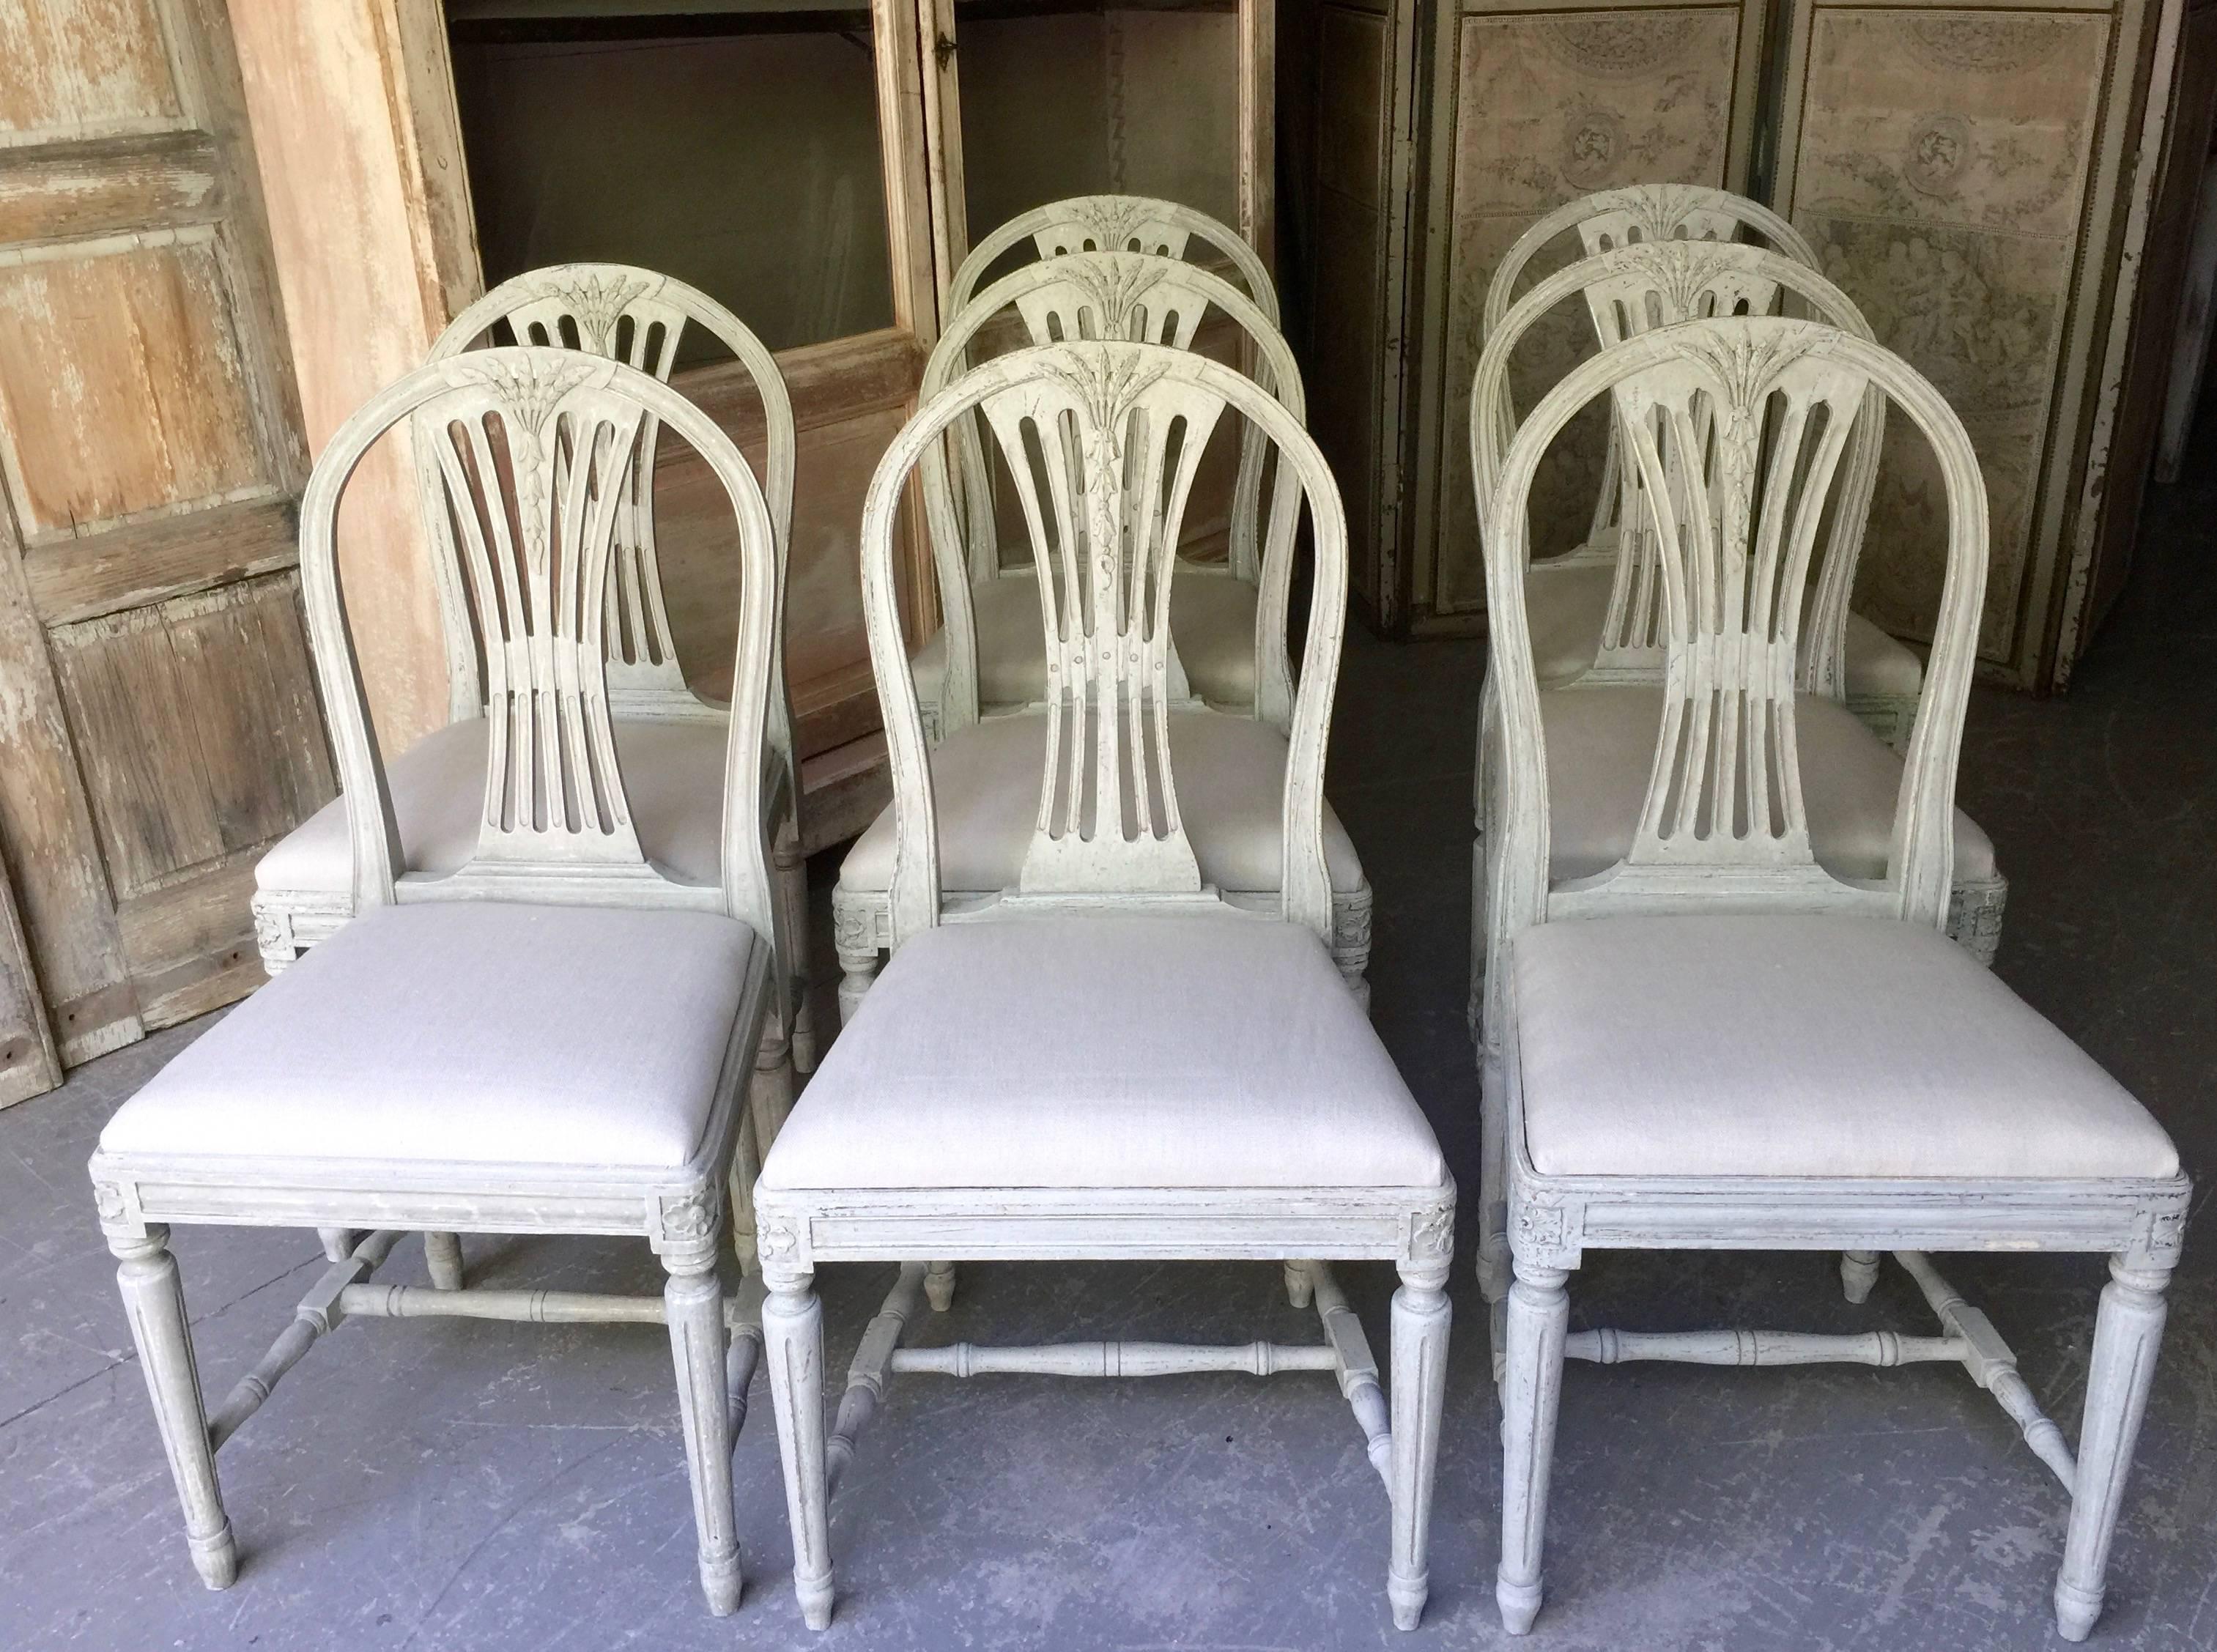 A set of eight 19th century Swedish Gustavian style painted dining chairs with pierced slats and carved weatsheaf details.
Seats covered in lightest gray linen.
Seat size:
19.50